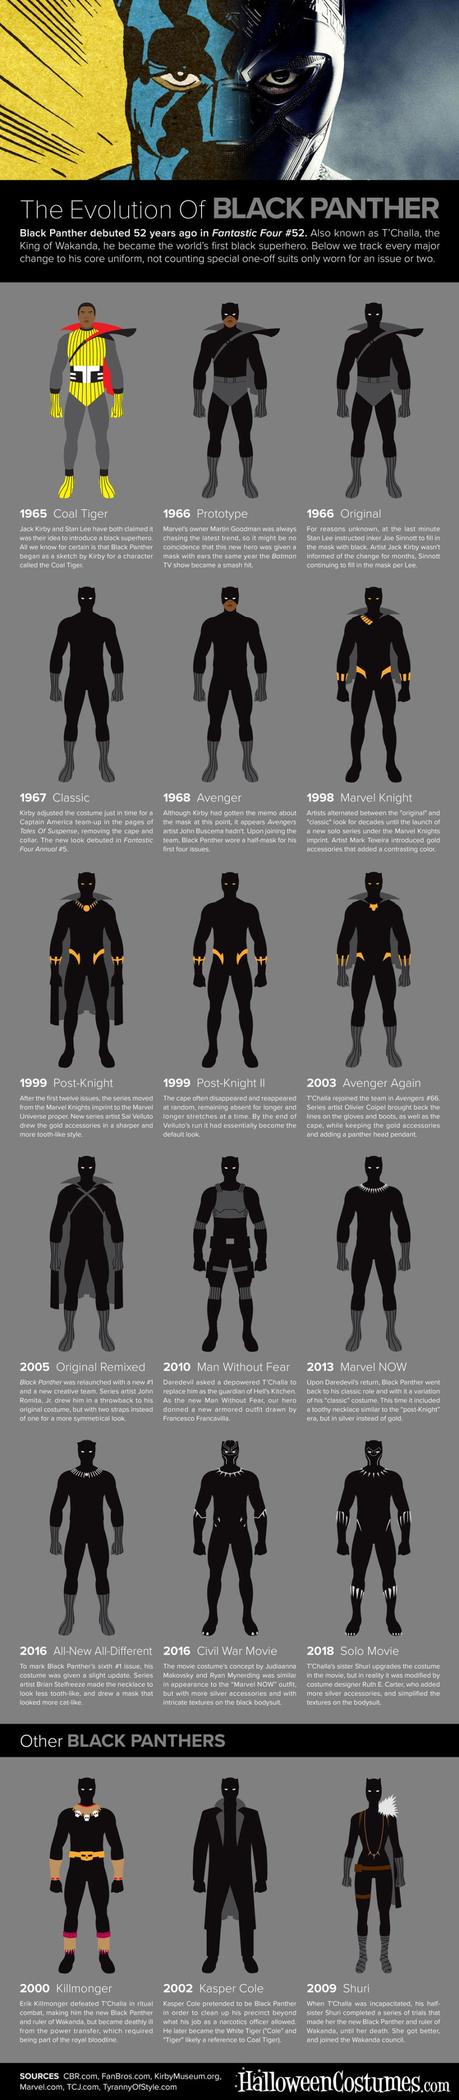 Black Panther Used to Have a Cape & Other Insights From a New Infographic